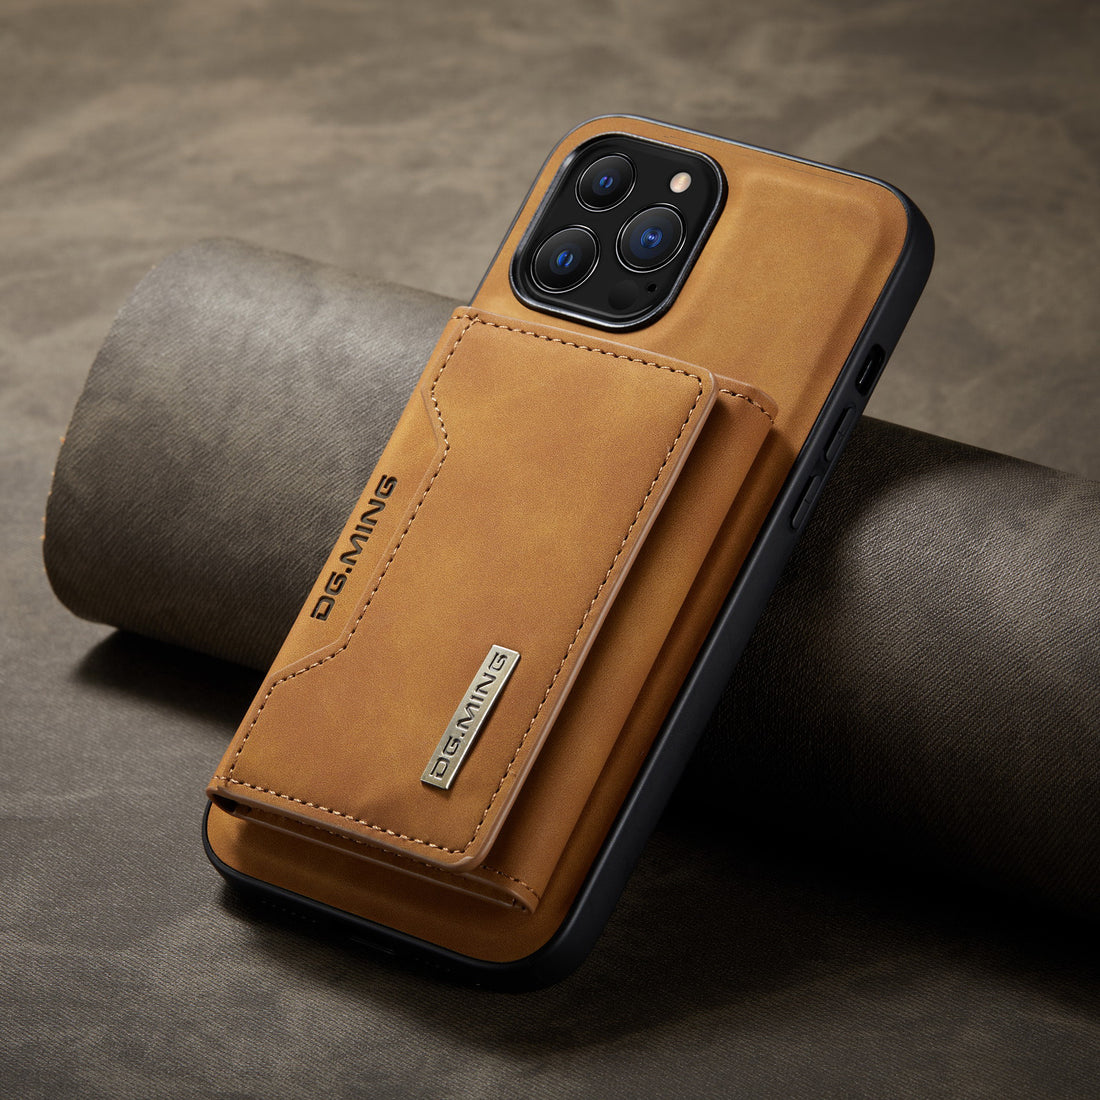 Experience Versatility and Style with the 2 In 1 Leather Wallet Cover Detachable Case from SkyCover Store